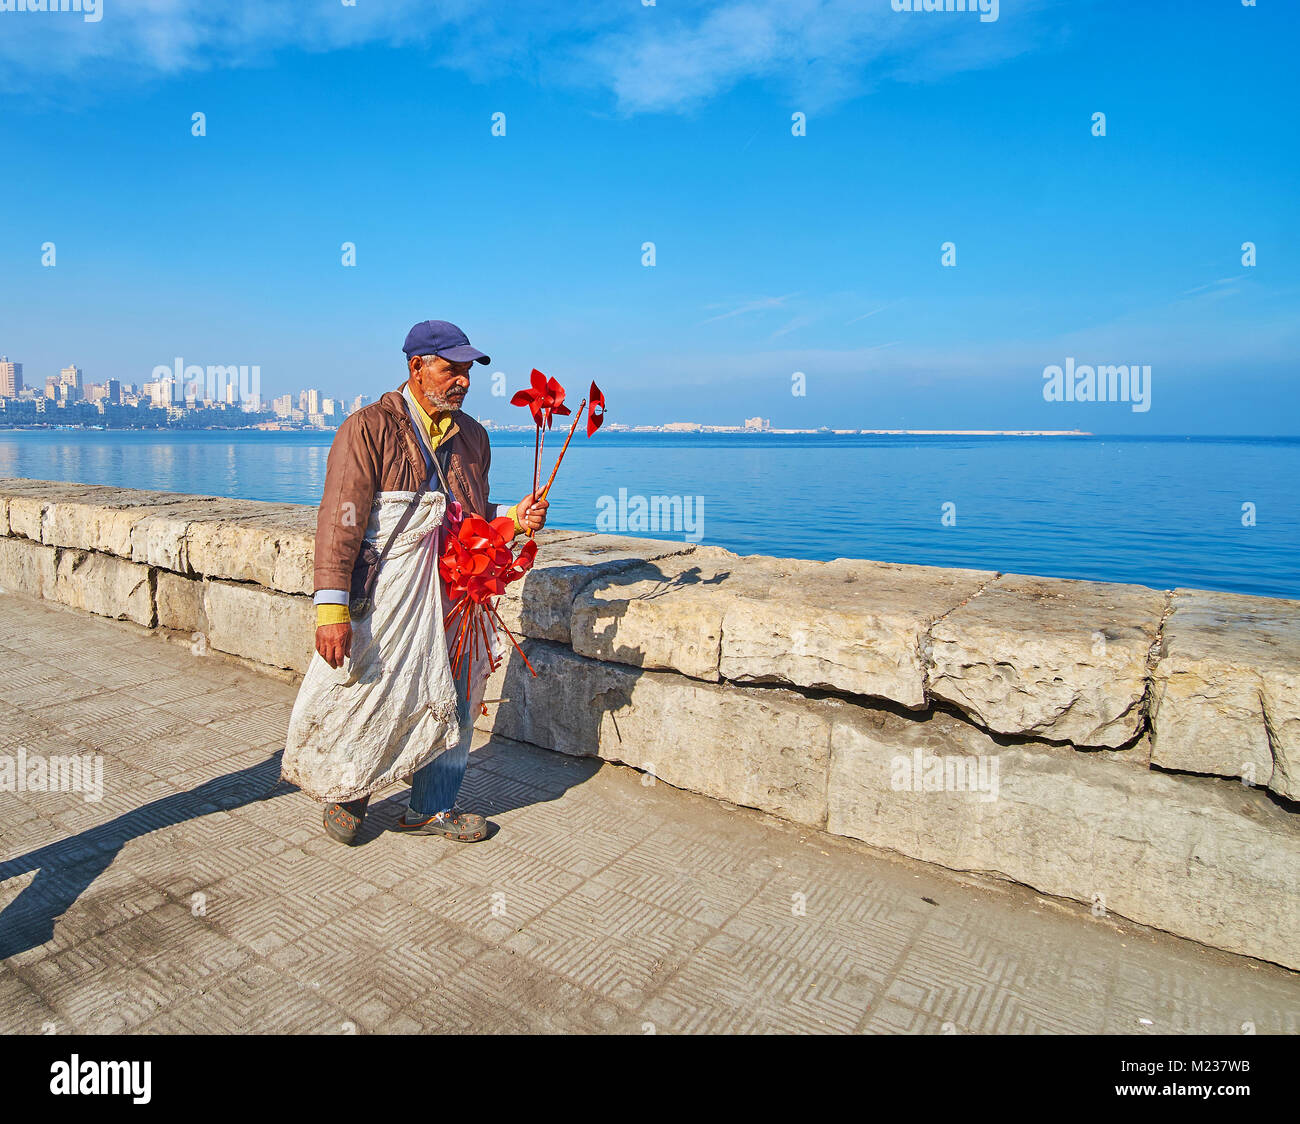 ALEXANDRIA, EGYPT - DECEMBER 17, 2017: The elderly vendor with red flower windmills goes along the Corniche promenade, on December 17 in Alexandria. Stock Photo